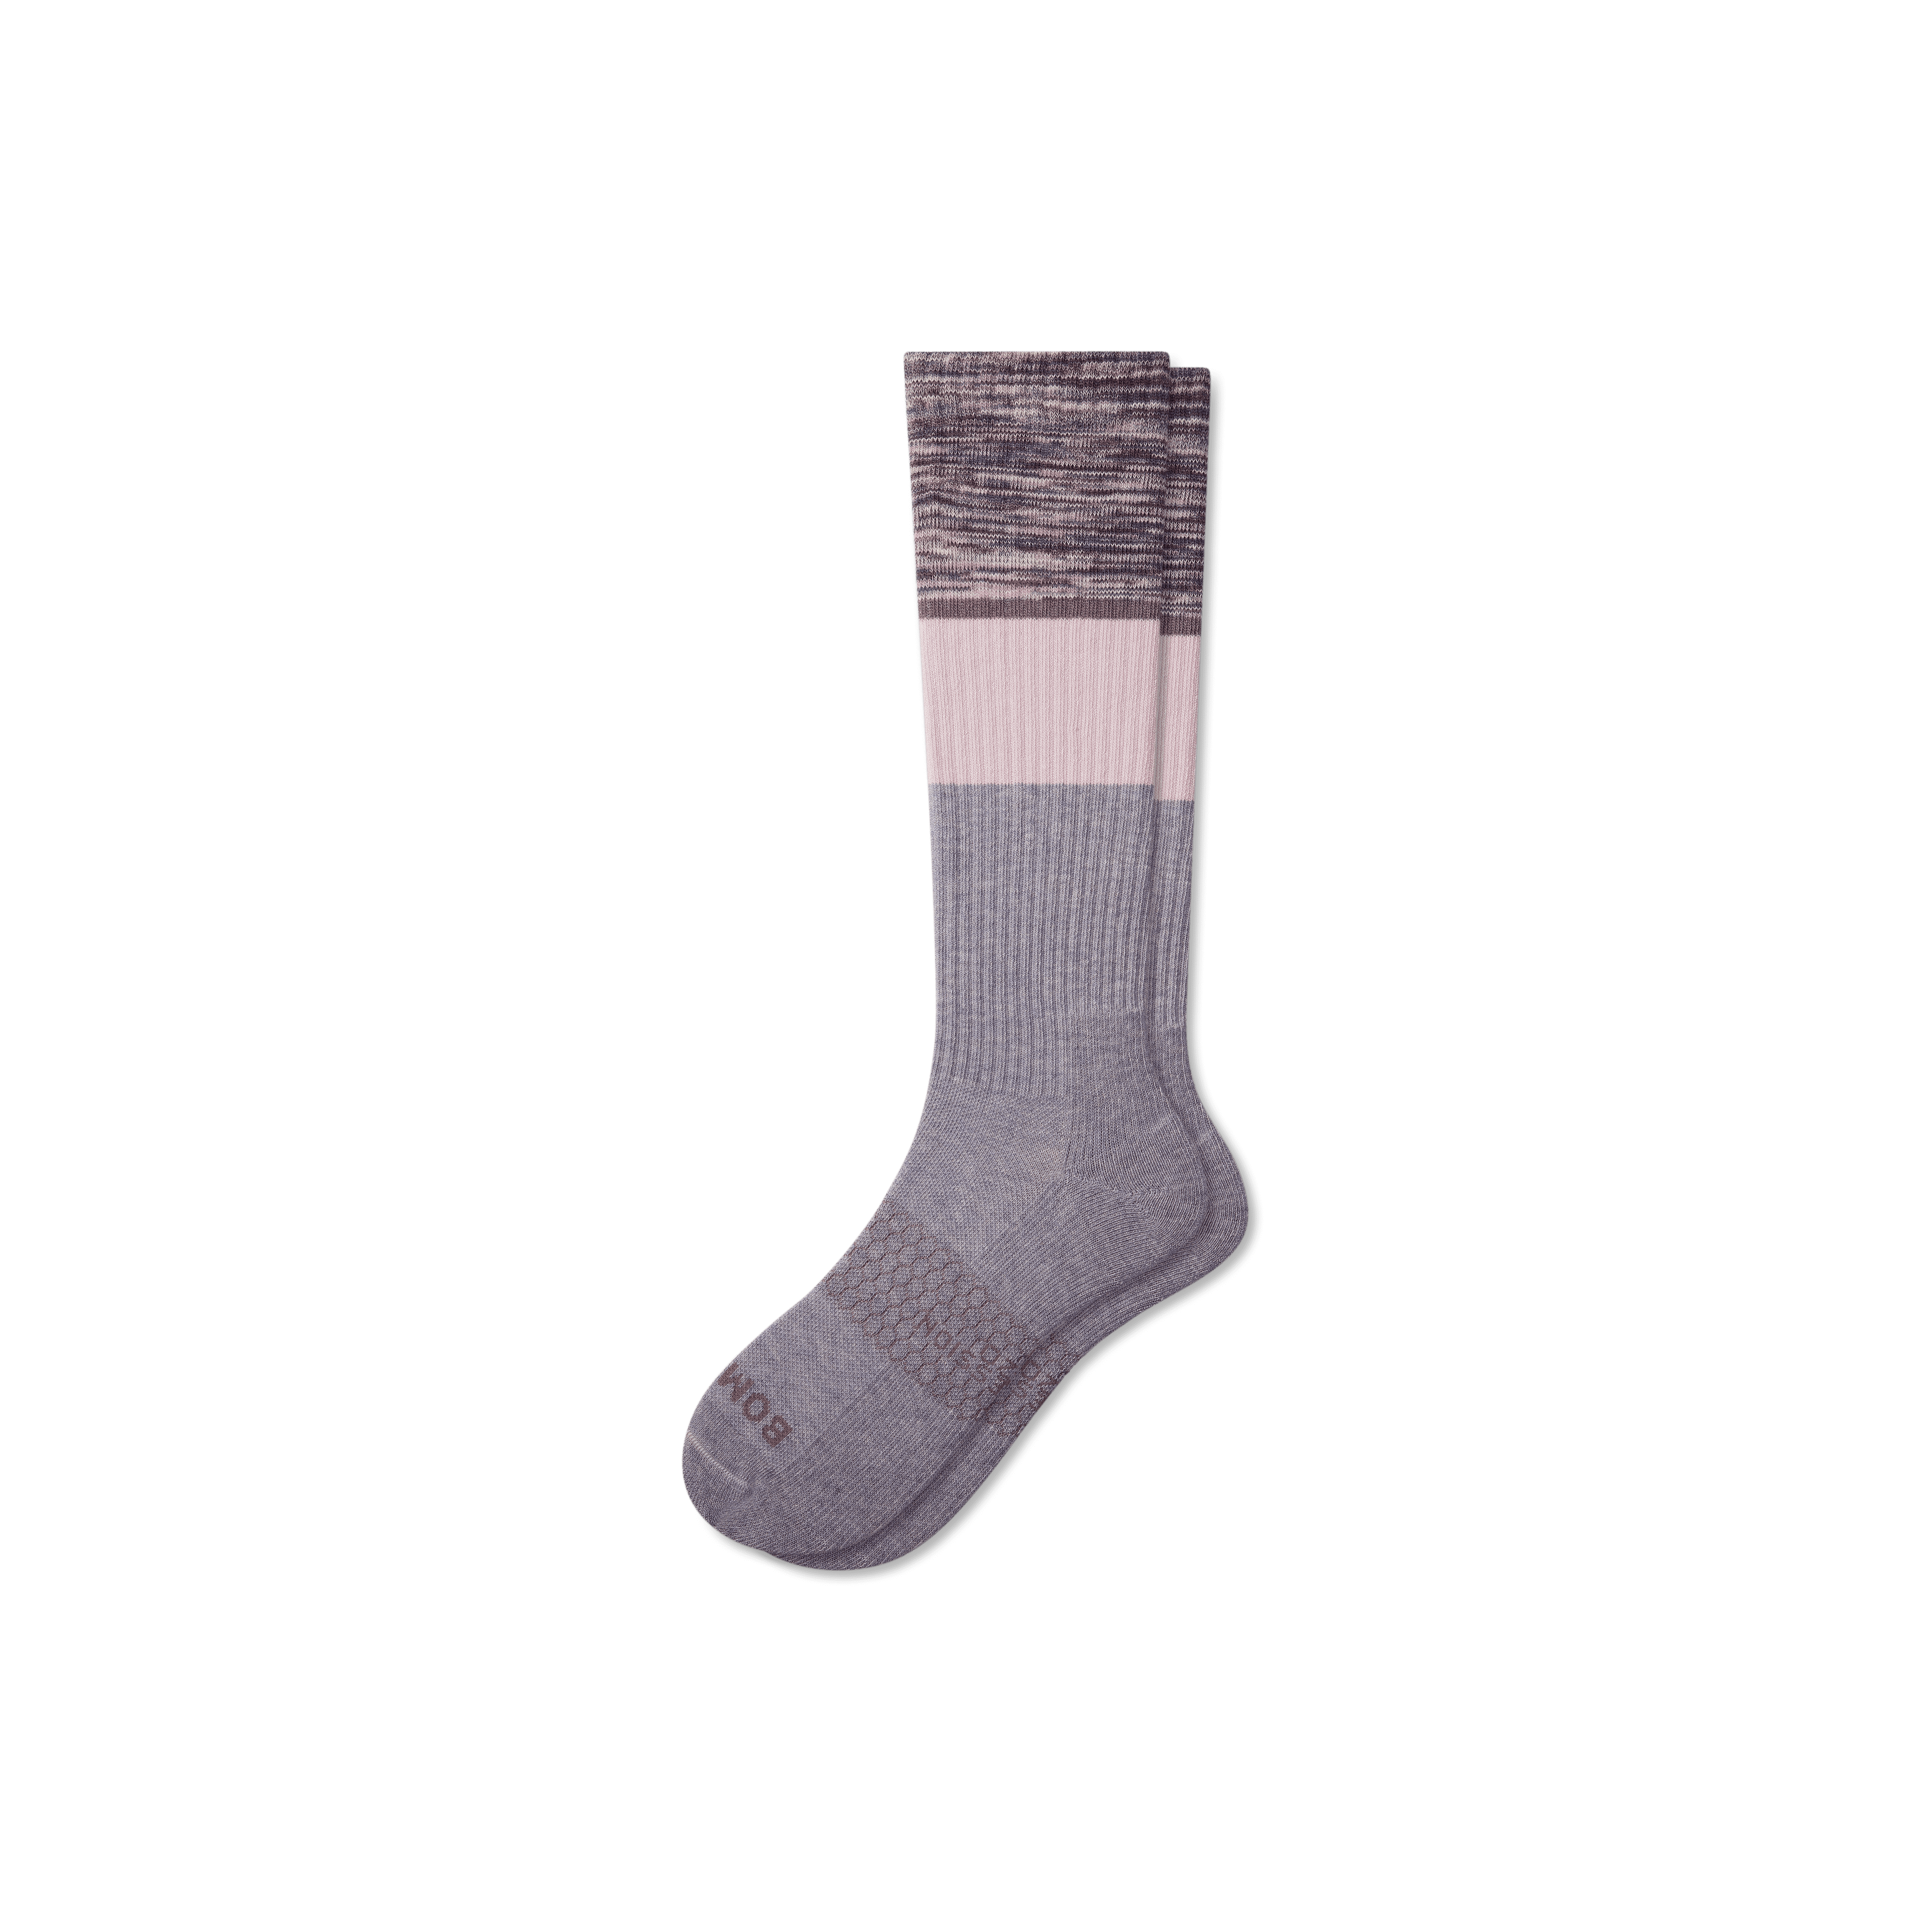 Bombas Everyday Compression Socks (15-20mmhg) In Washed Purple